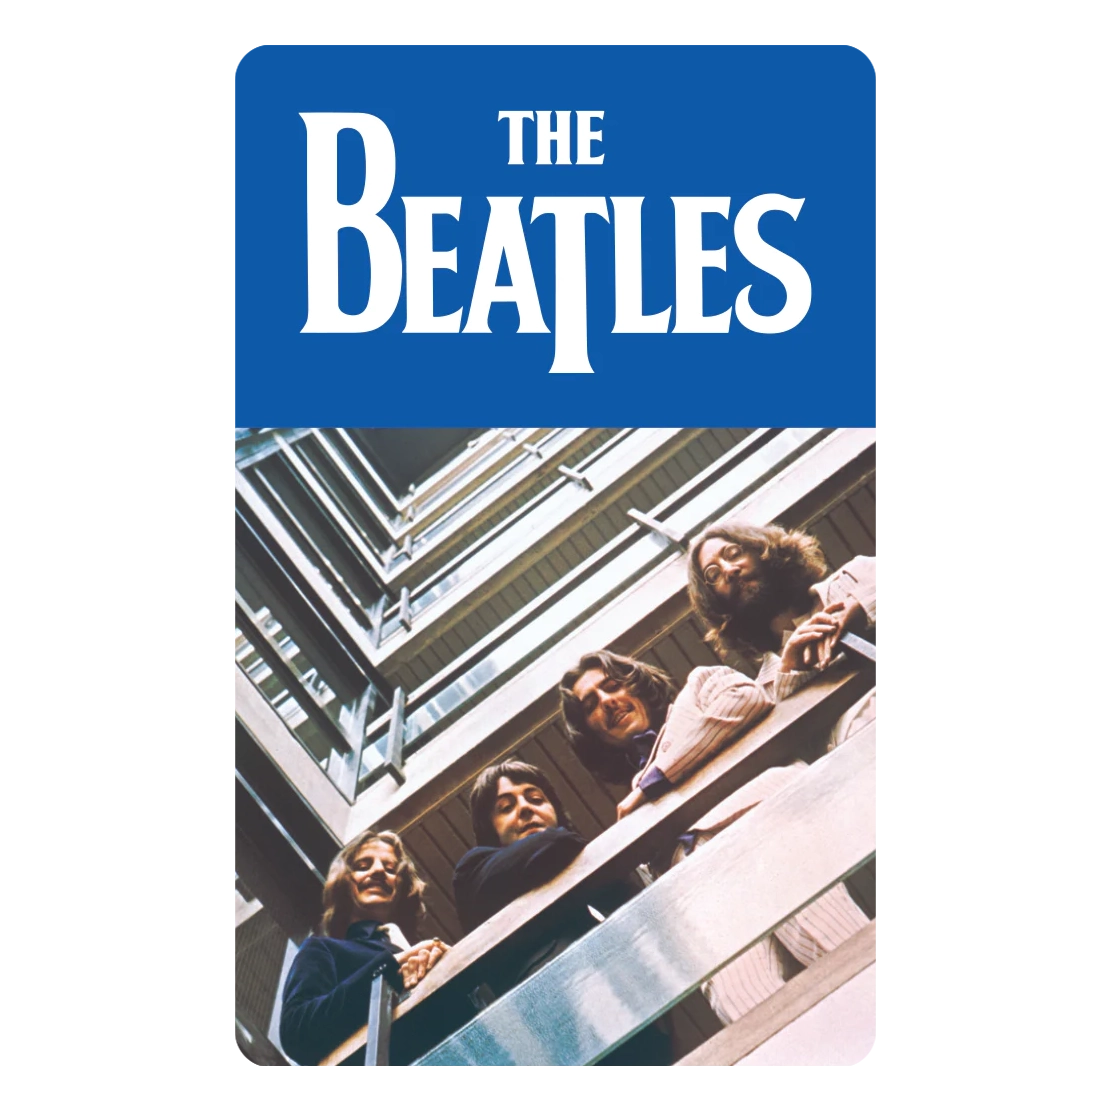 The Beatles - The Beatles 1967 – 1970 (Yoto Edition)